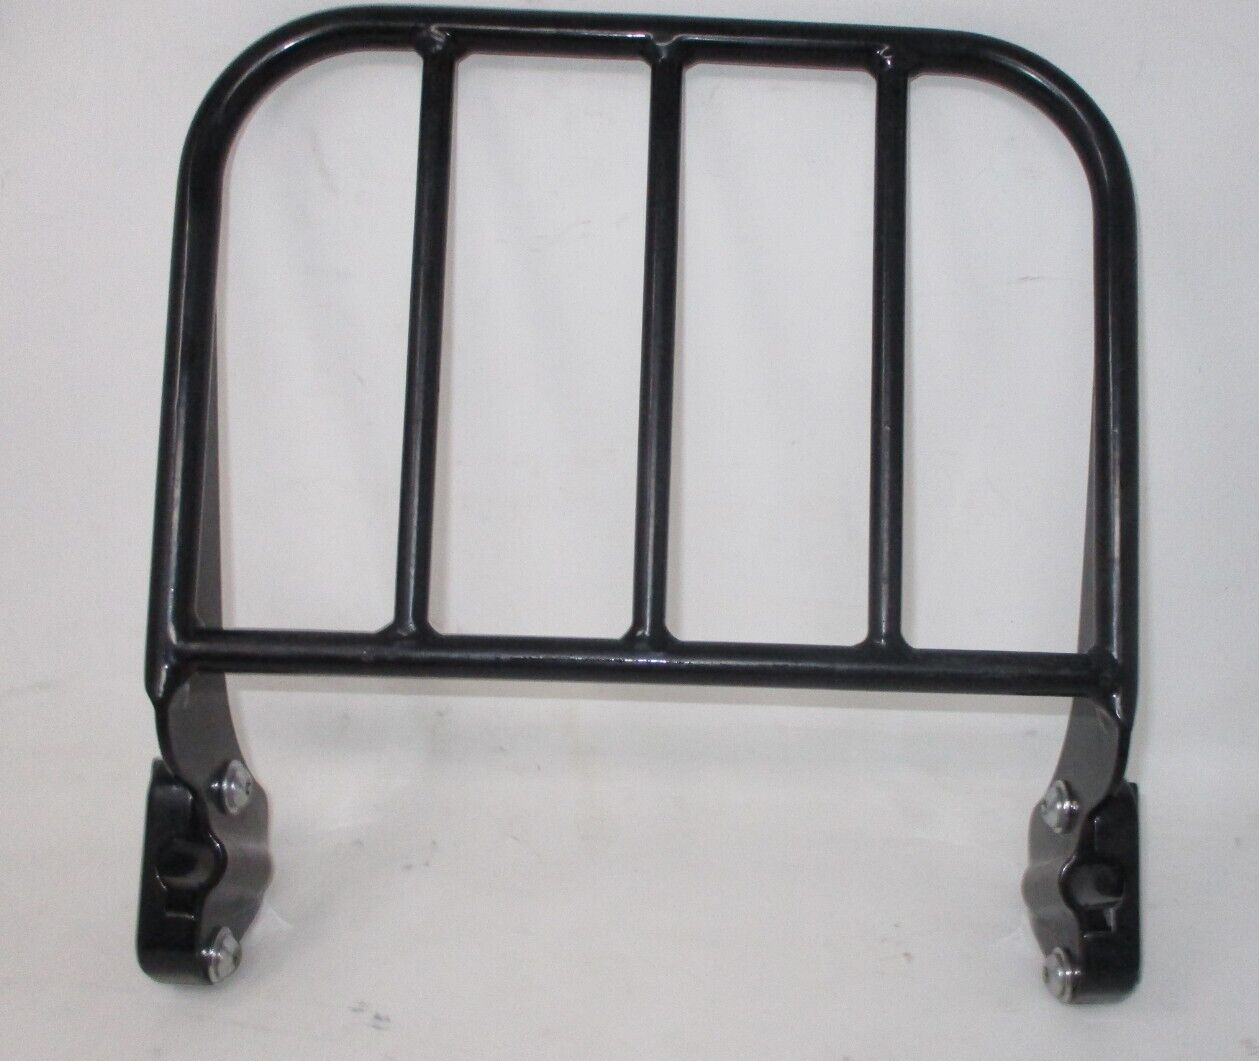 Unknown Brand Luggage Rack